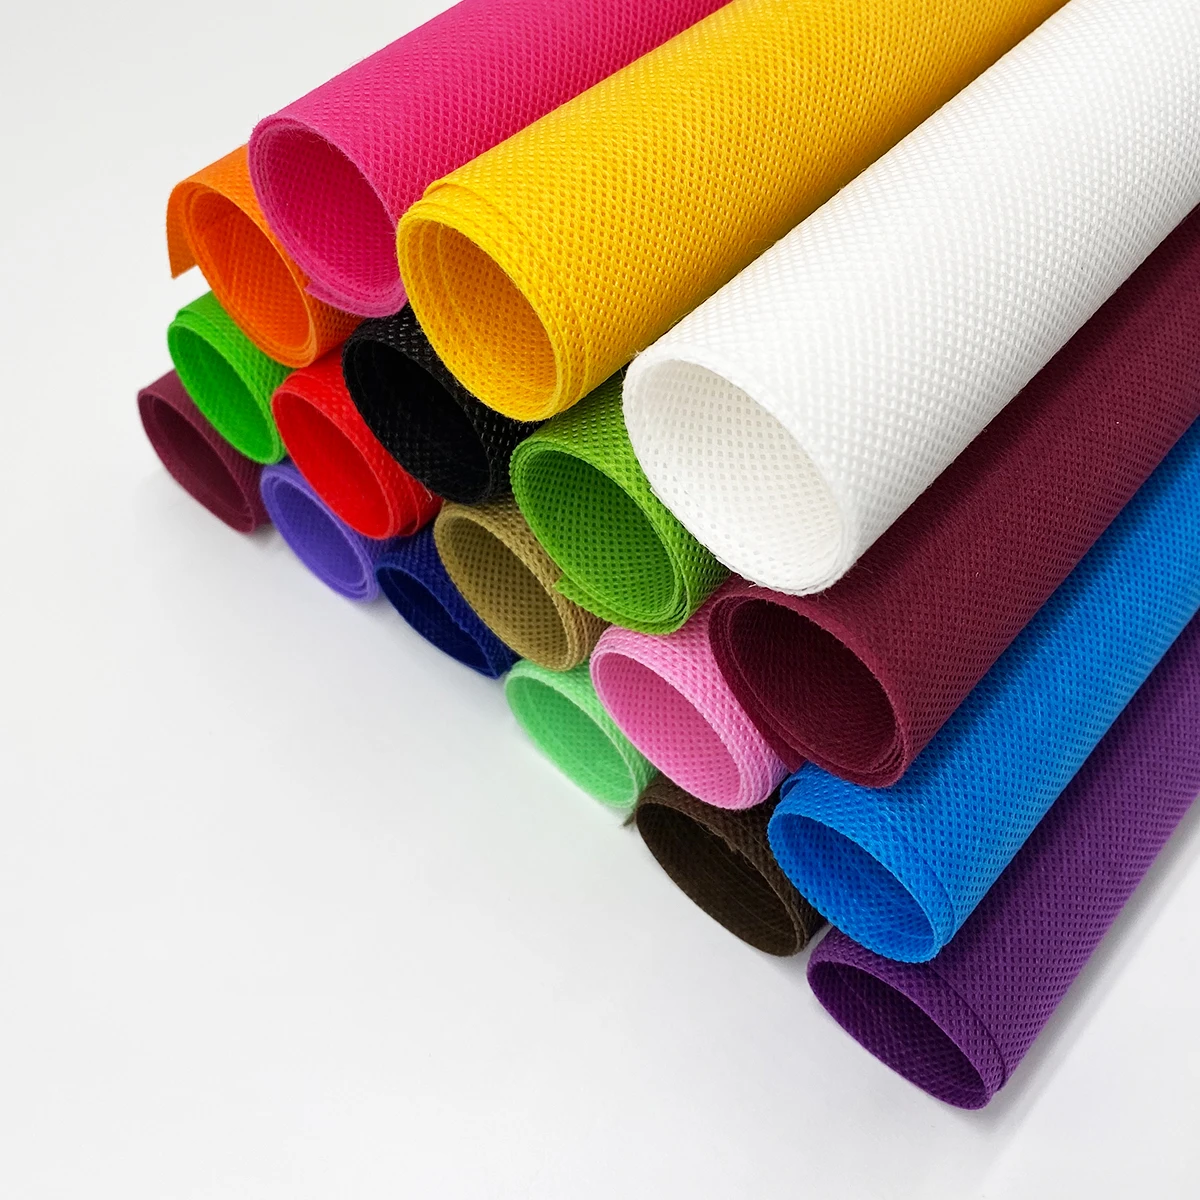 

3% UV pp Spun Bond Nonwoven Agriculture/Spun-bonded Agriculture PP Nonwoven Fabric/Waste Recycling PP Nonwoven Fabric